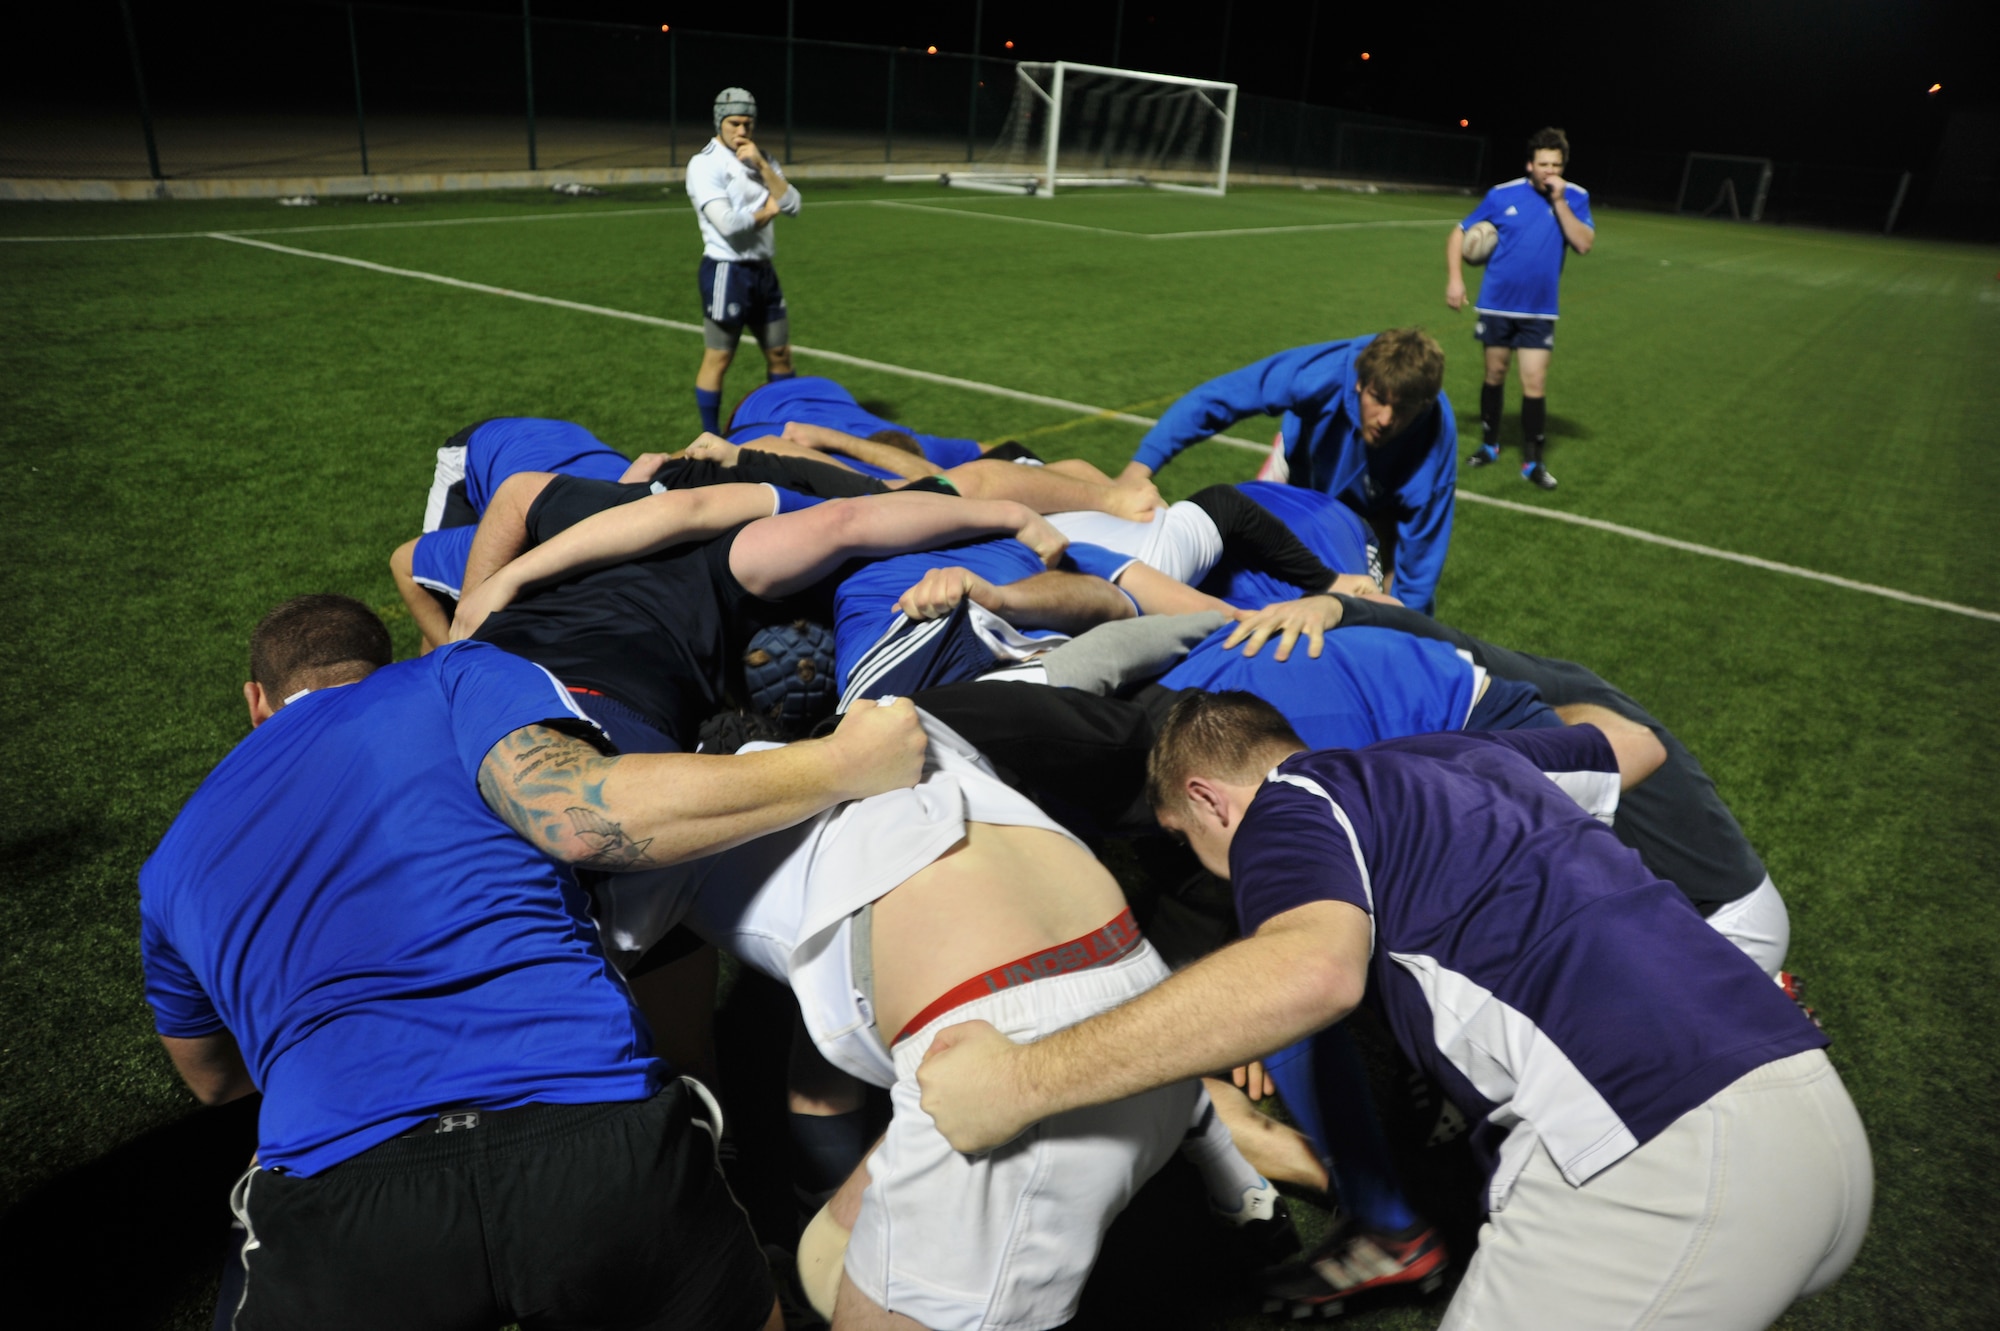 The Kansas City Blues Rugby Club, the only professionally-backed rugby sporting club in America, works on their “scrum” technique during practice in Kansas City, Mo., March 14, 2013. During a scrum, the eight most powerful players from each team collide with each other and battle for the ball on the command of a referee. (U.S. Air Force photo by Senior Airman Brigitte N. Brantley/Released)